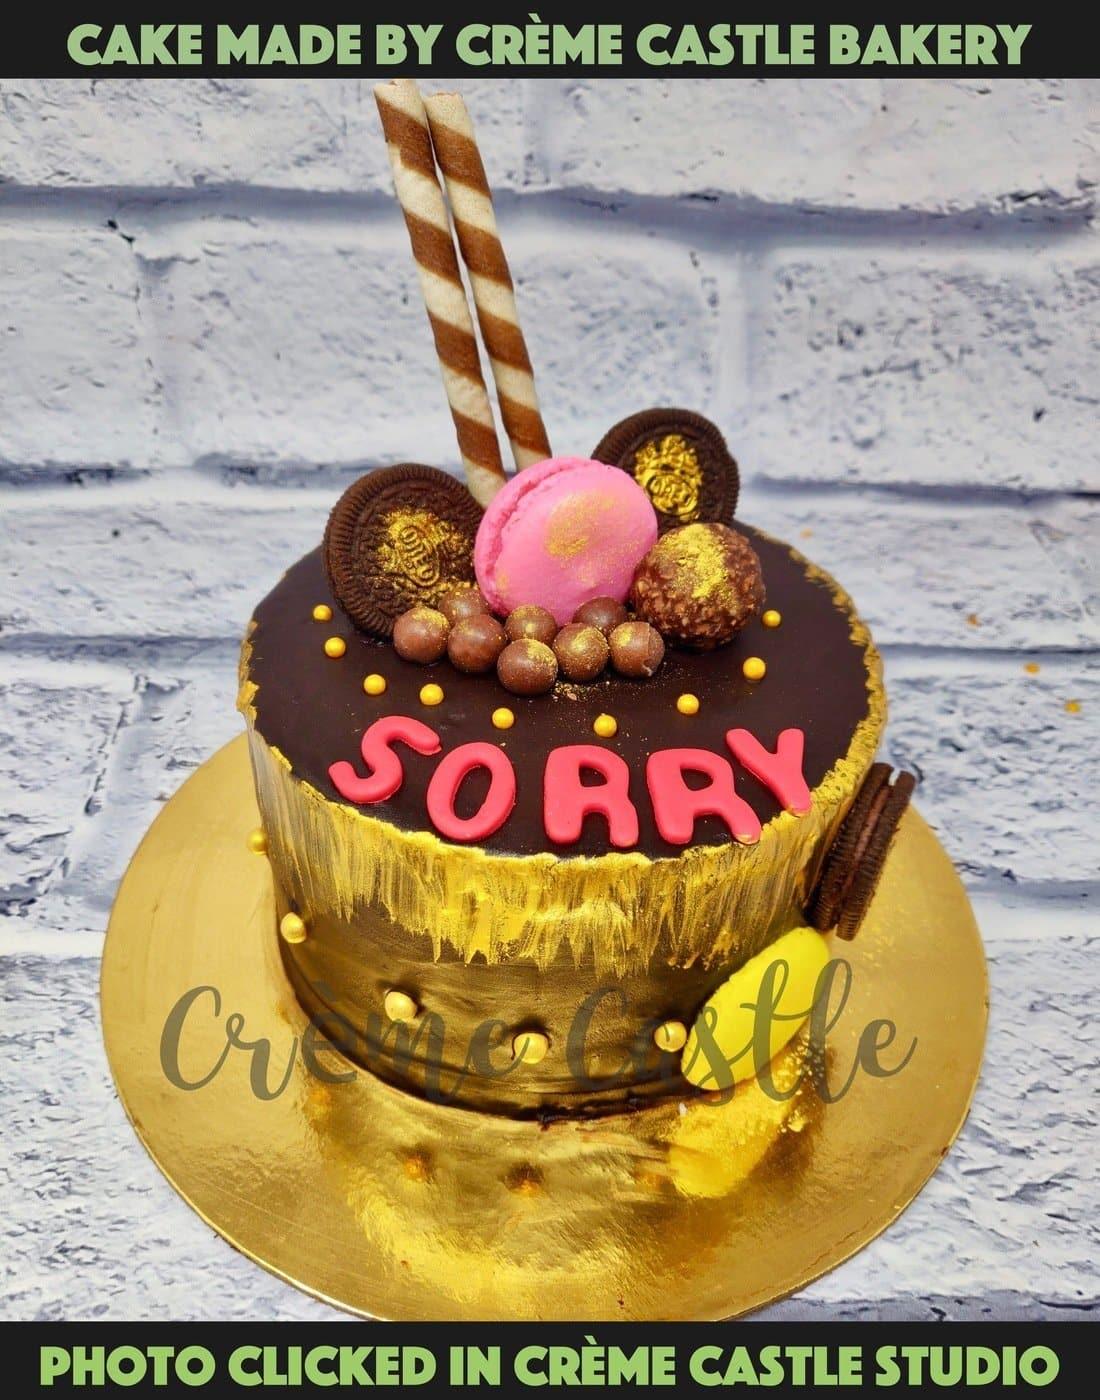 Share more than 84 cake sorry latest - awesomeenglish.edu.vn